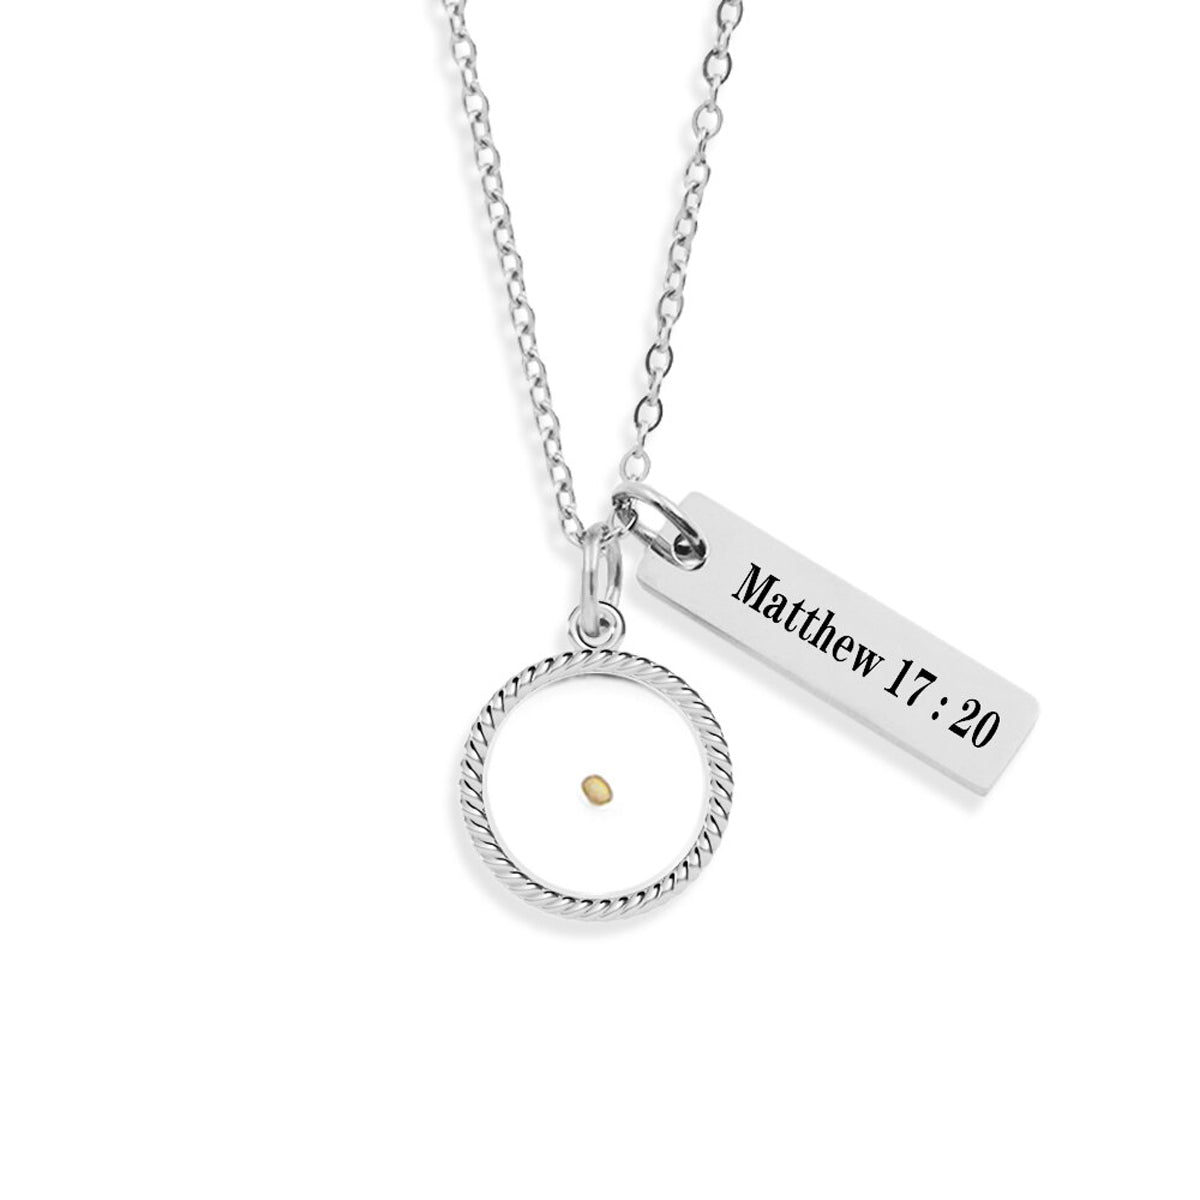 Mustard Seed Faith W/Verse Necklace Stainless Steel Jewelry